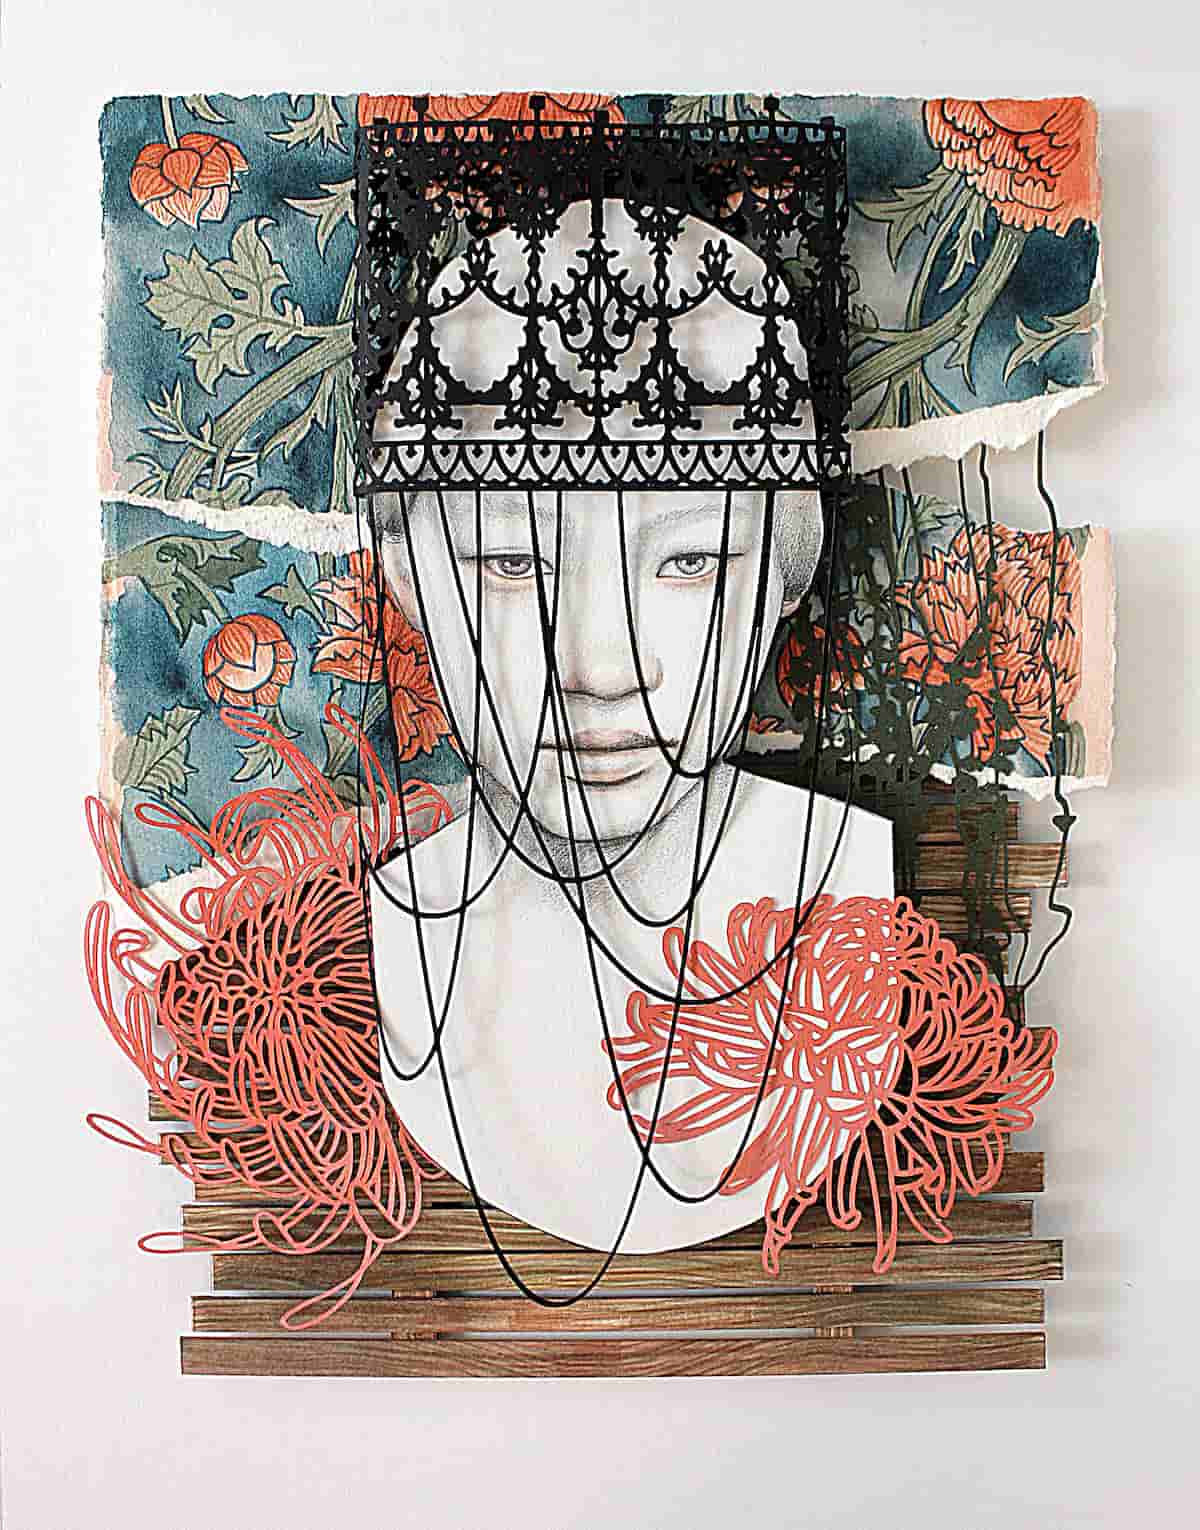 In intricately cut collages, Layers of Intricately Cut Paper Evoke Strength and Vulnerability in Elegant Collages